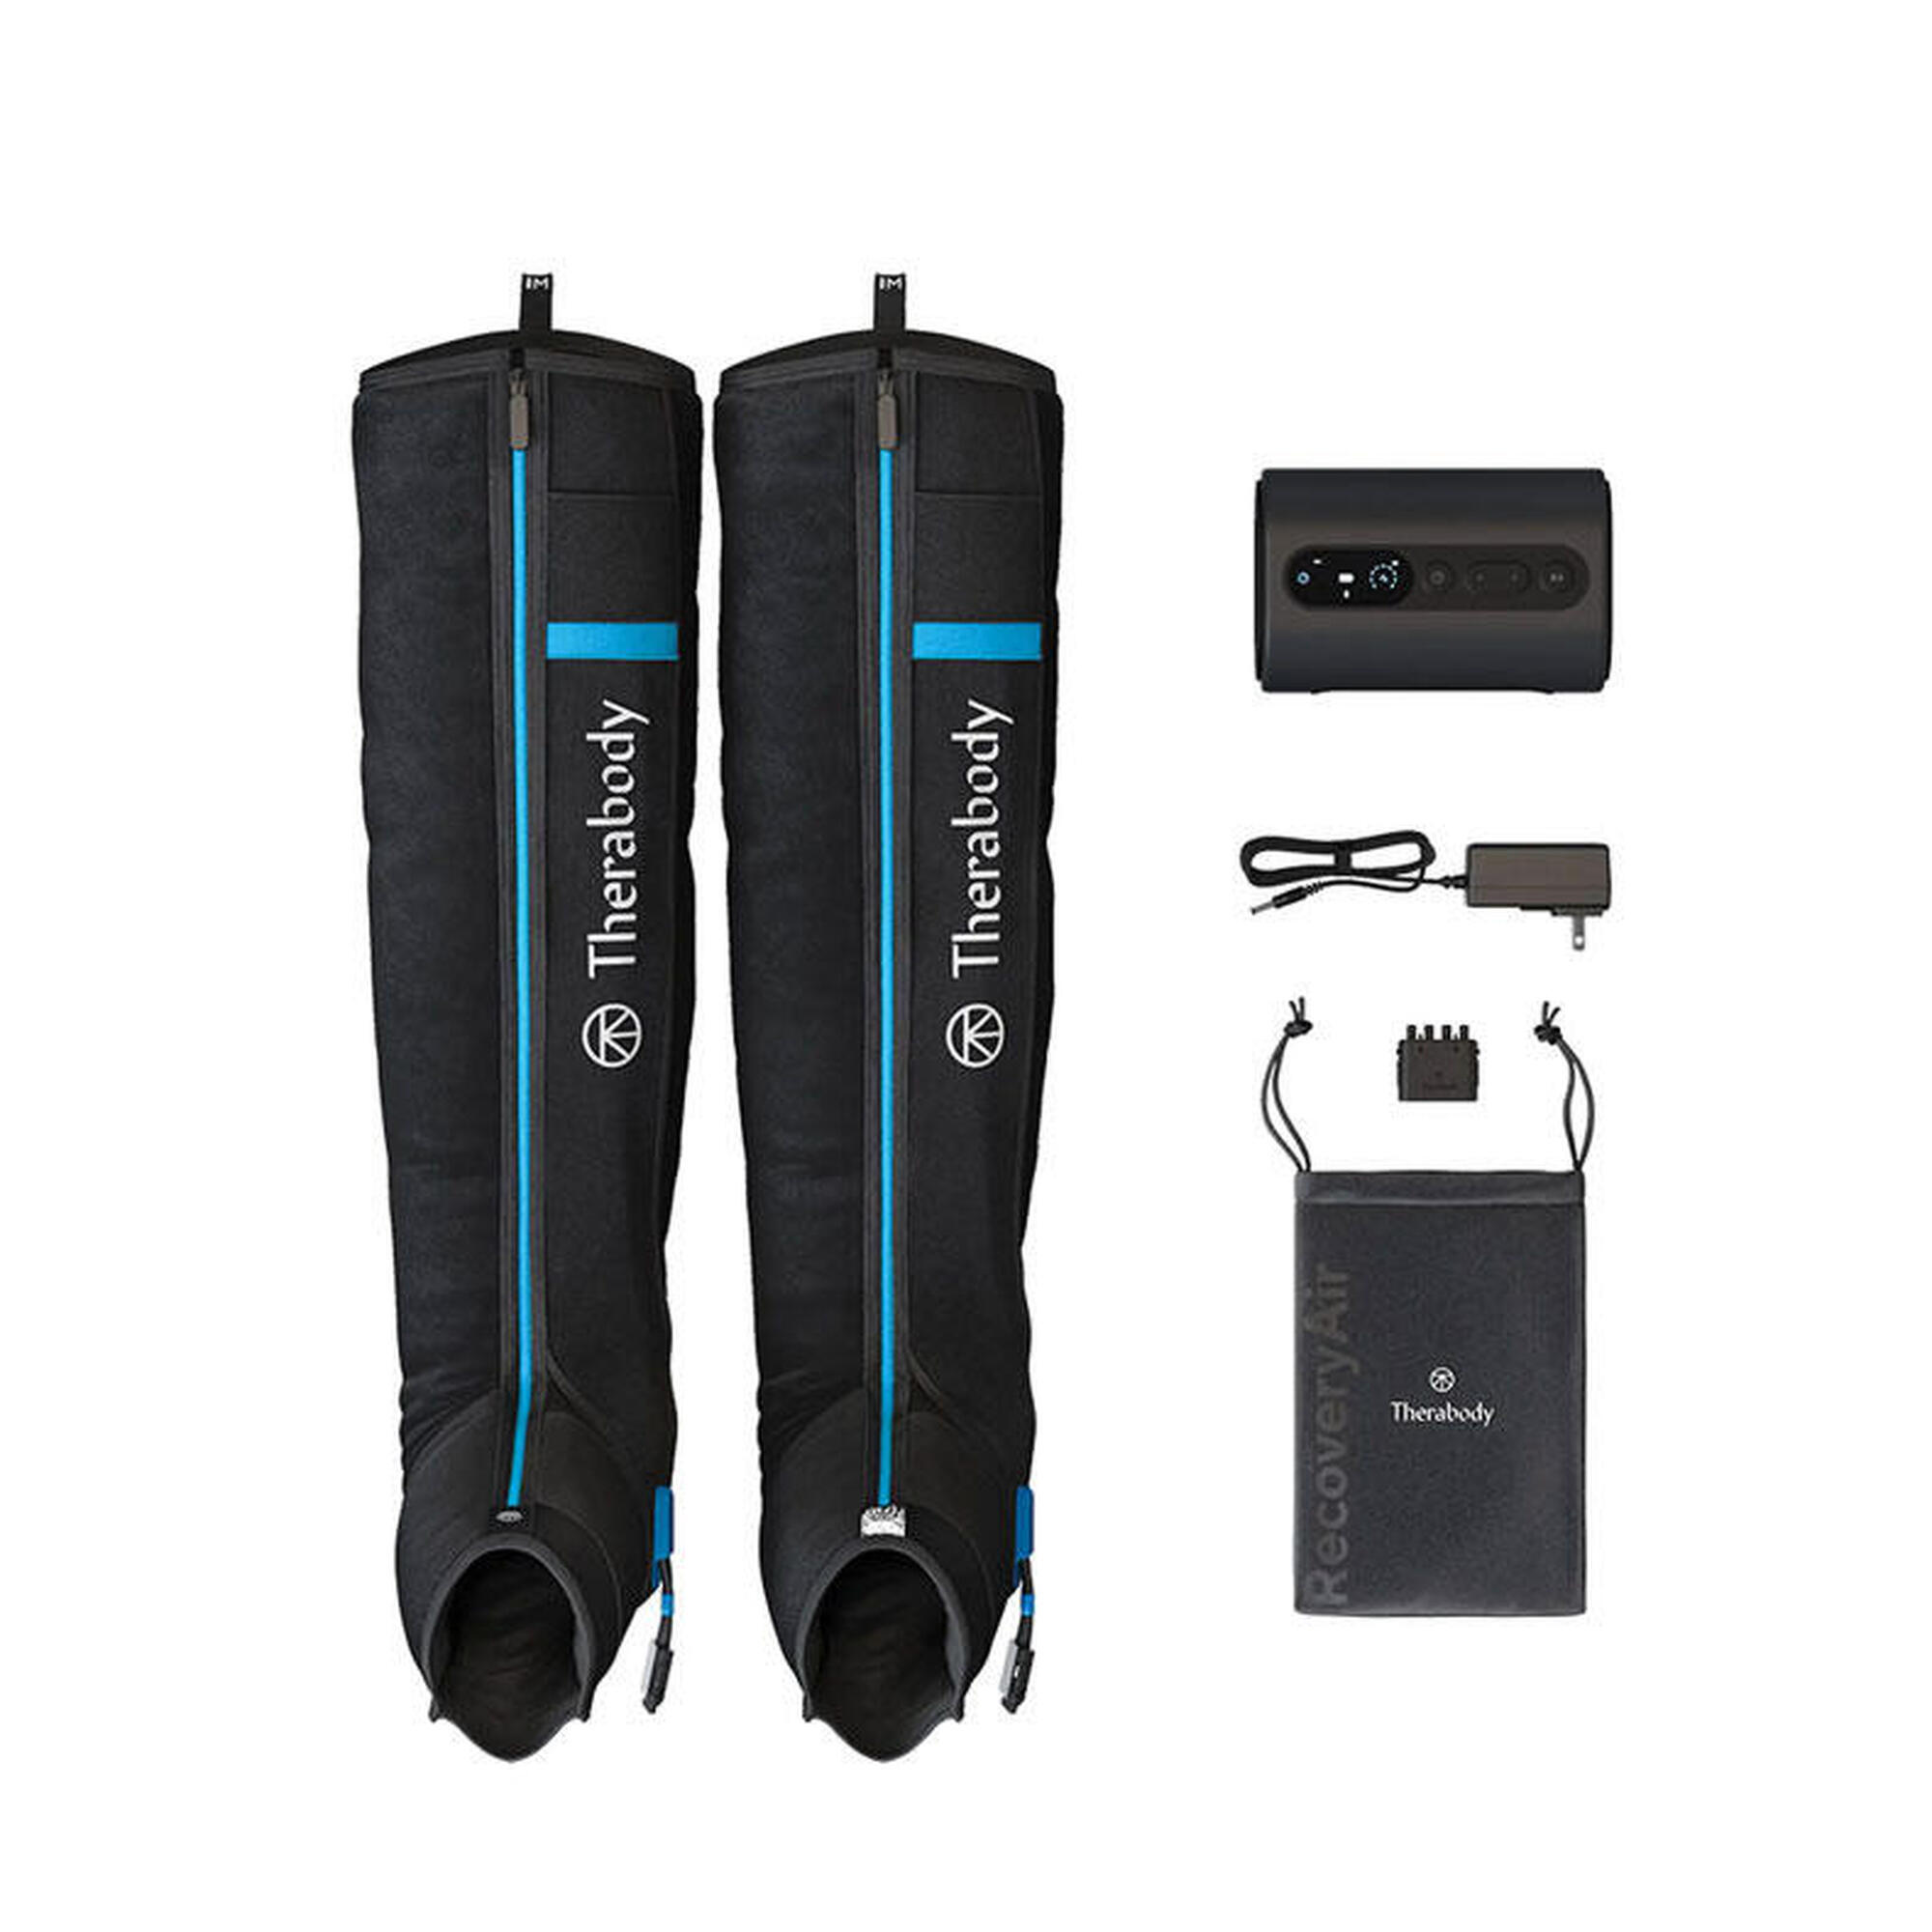 Wireless Boots a compressione Therabody RecoveryAir Prime Compression